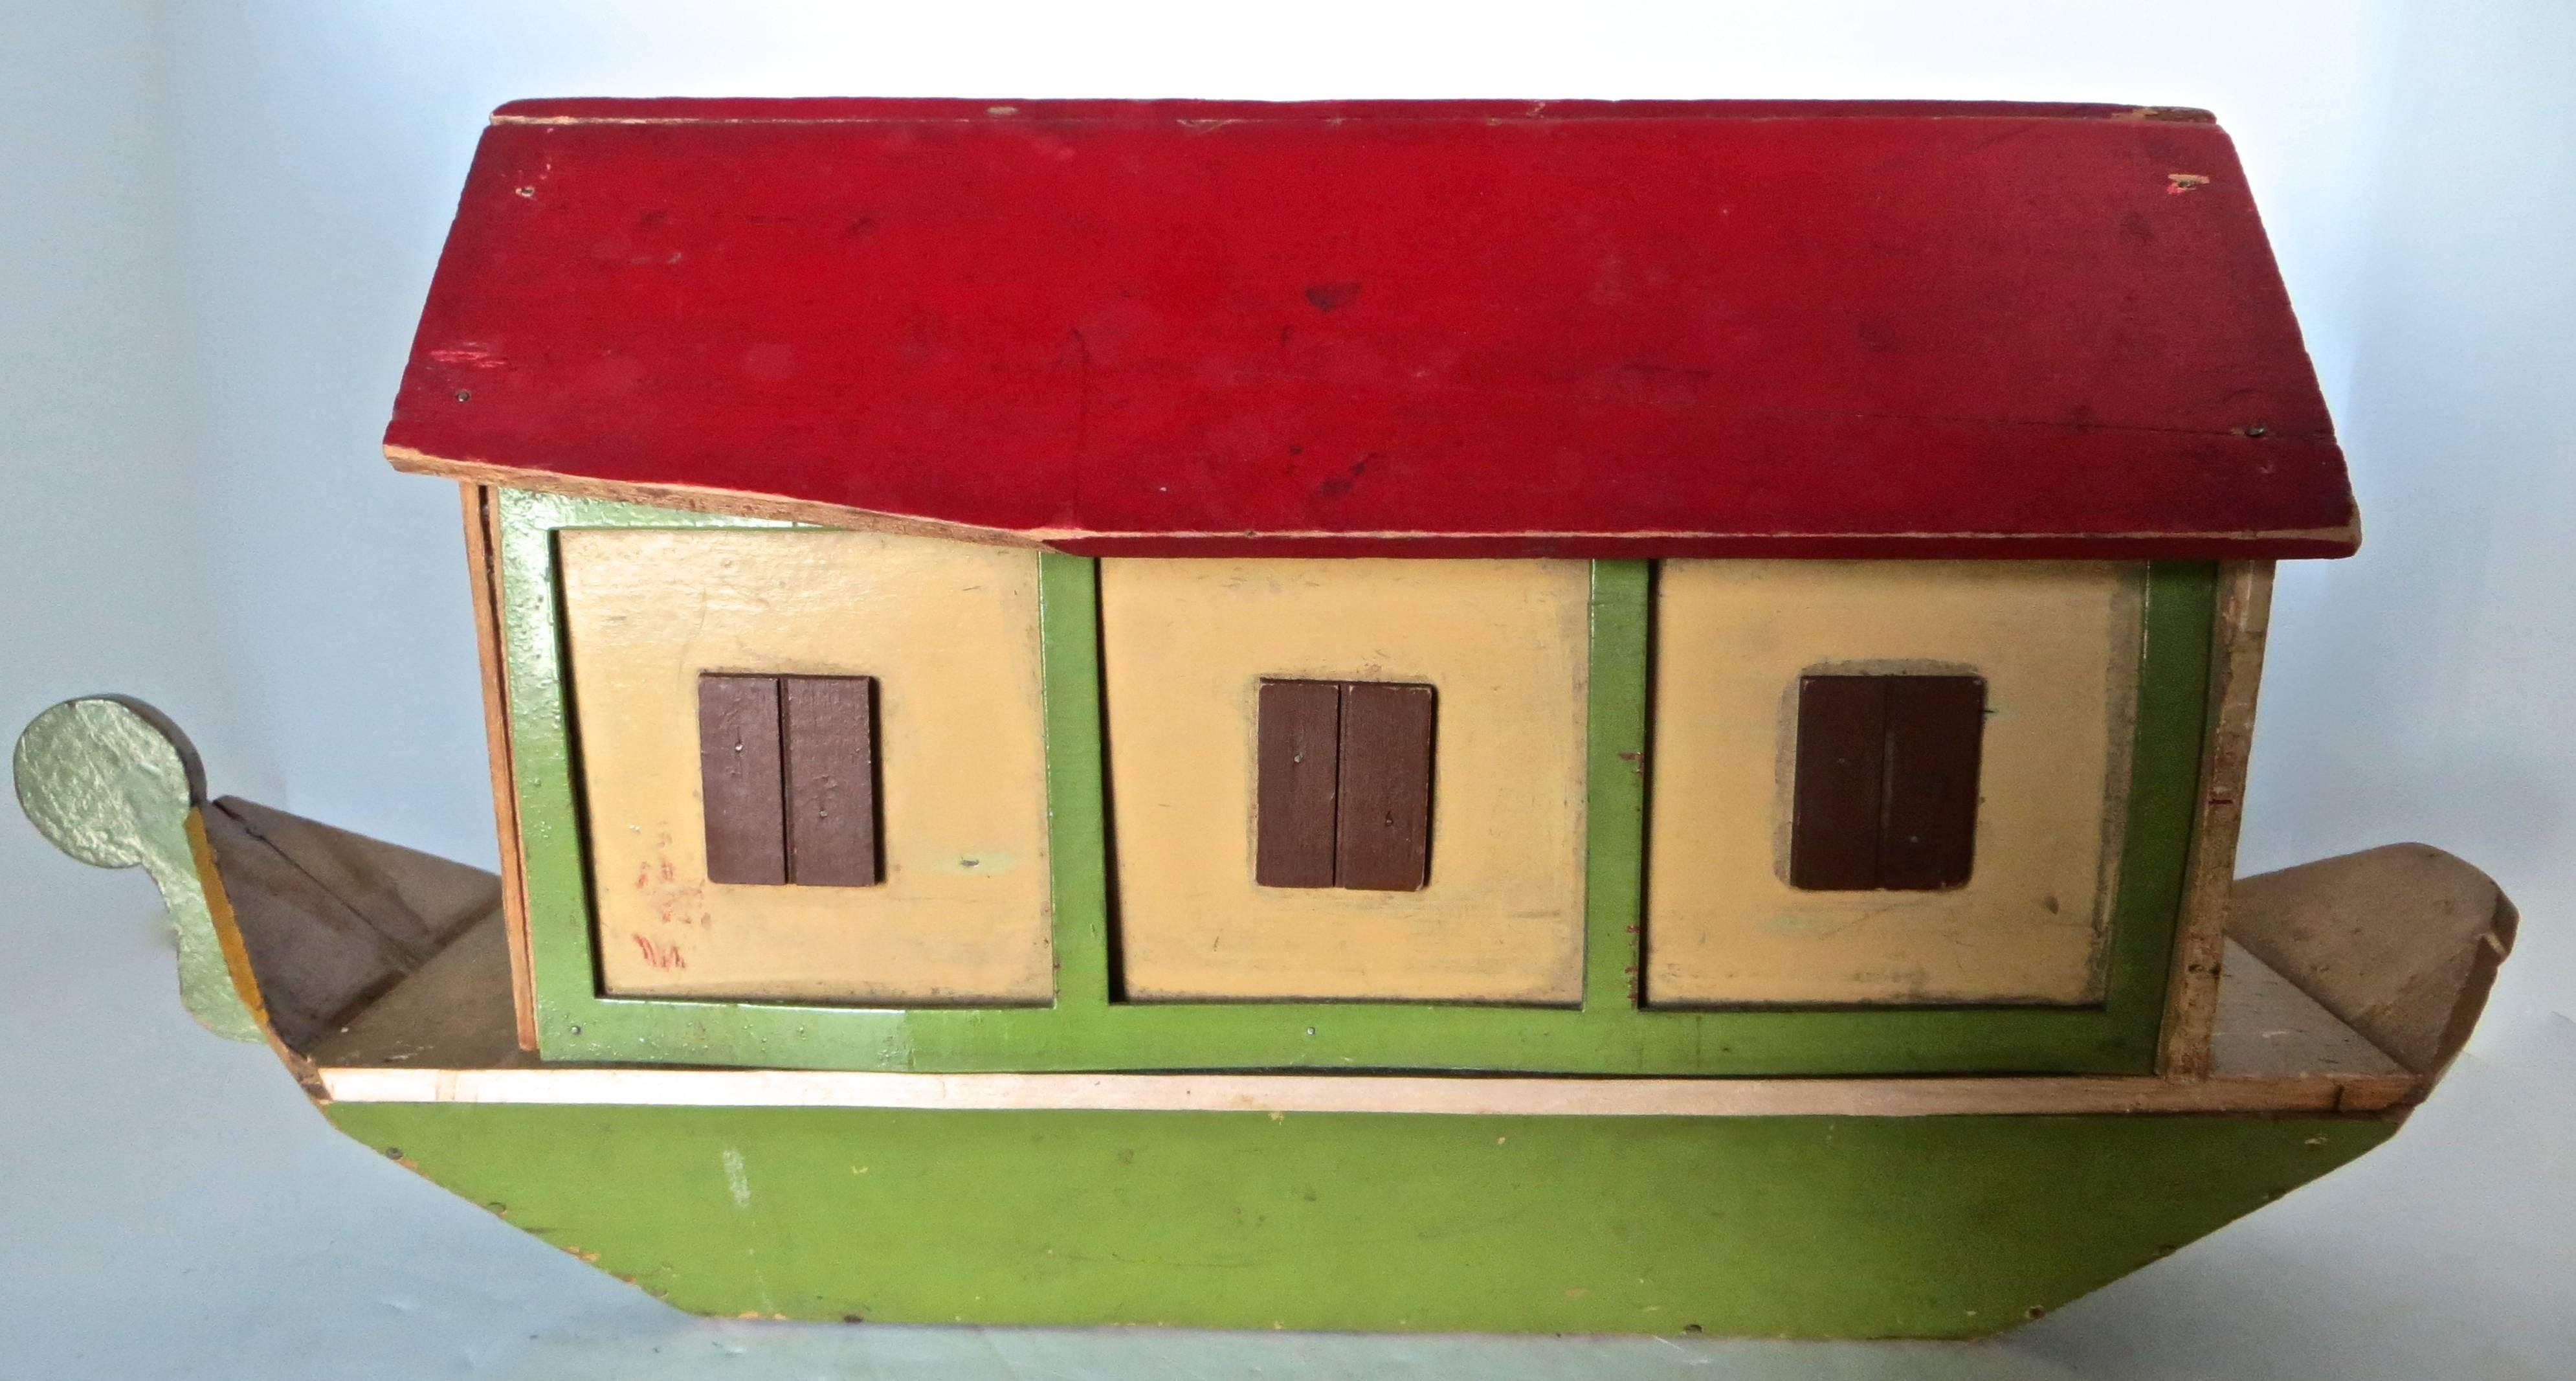 Toy Noah’s Arks for children to play with were very popular in the late 19th and early 20th century, and Germany was very prolific in their production. This particular ark is all original and has the entry/exit ramp platform along with 30 figures,